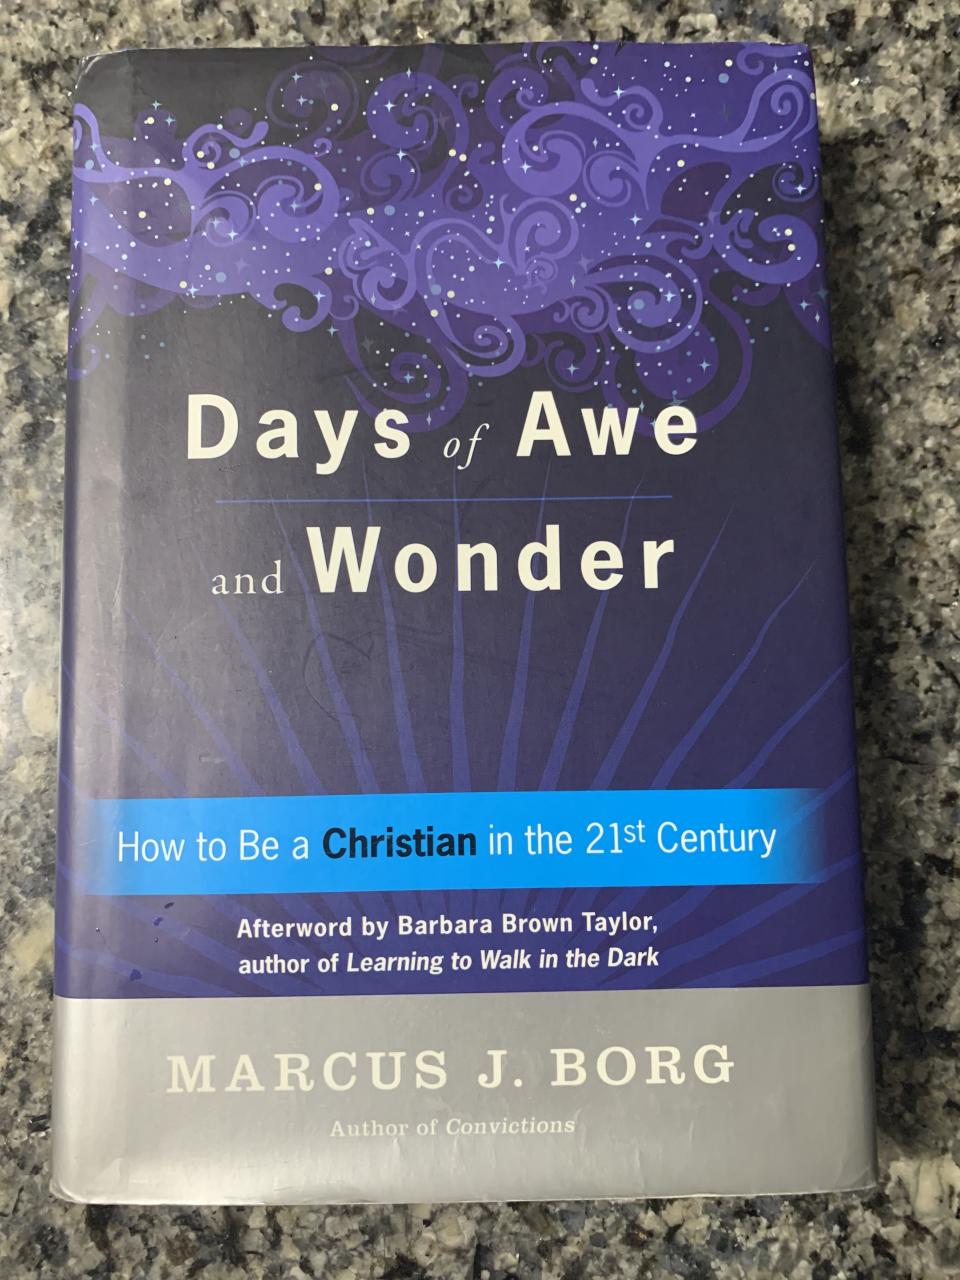 Marcus Borg encourages awareness of the spiritual world and its power.